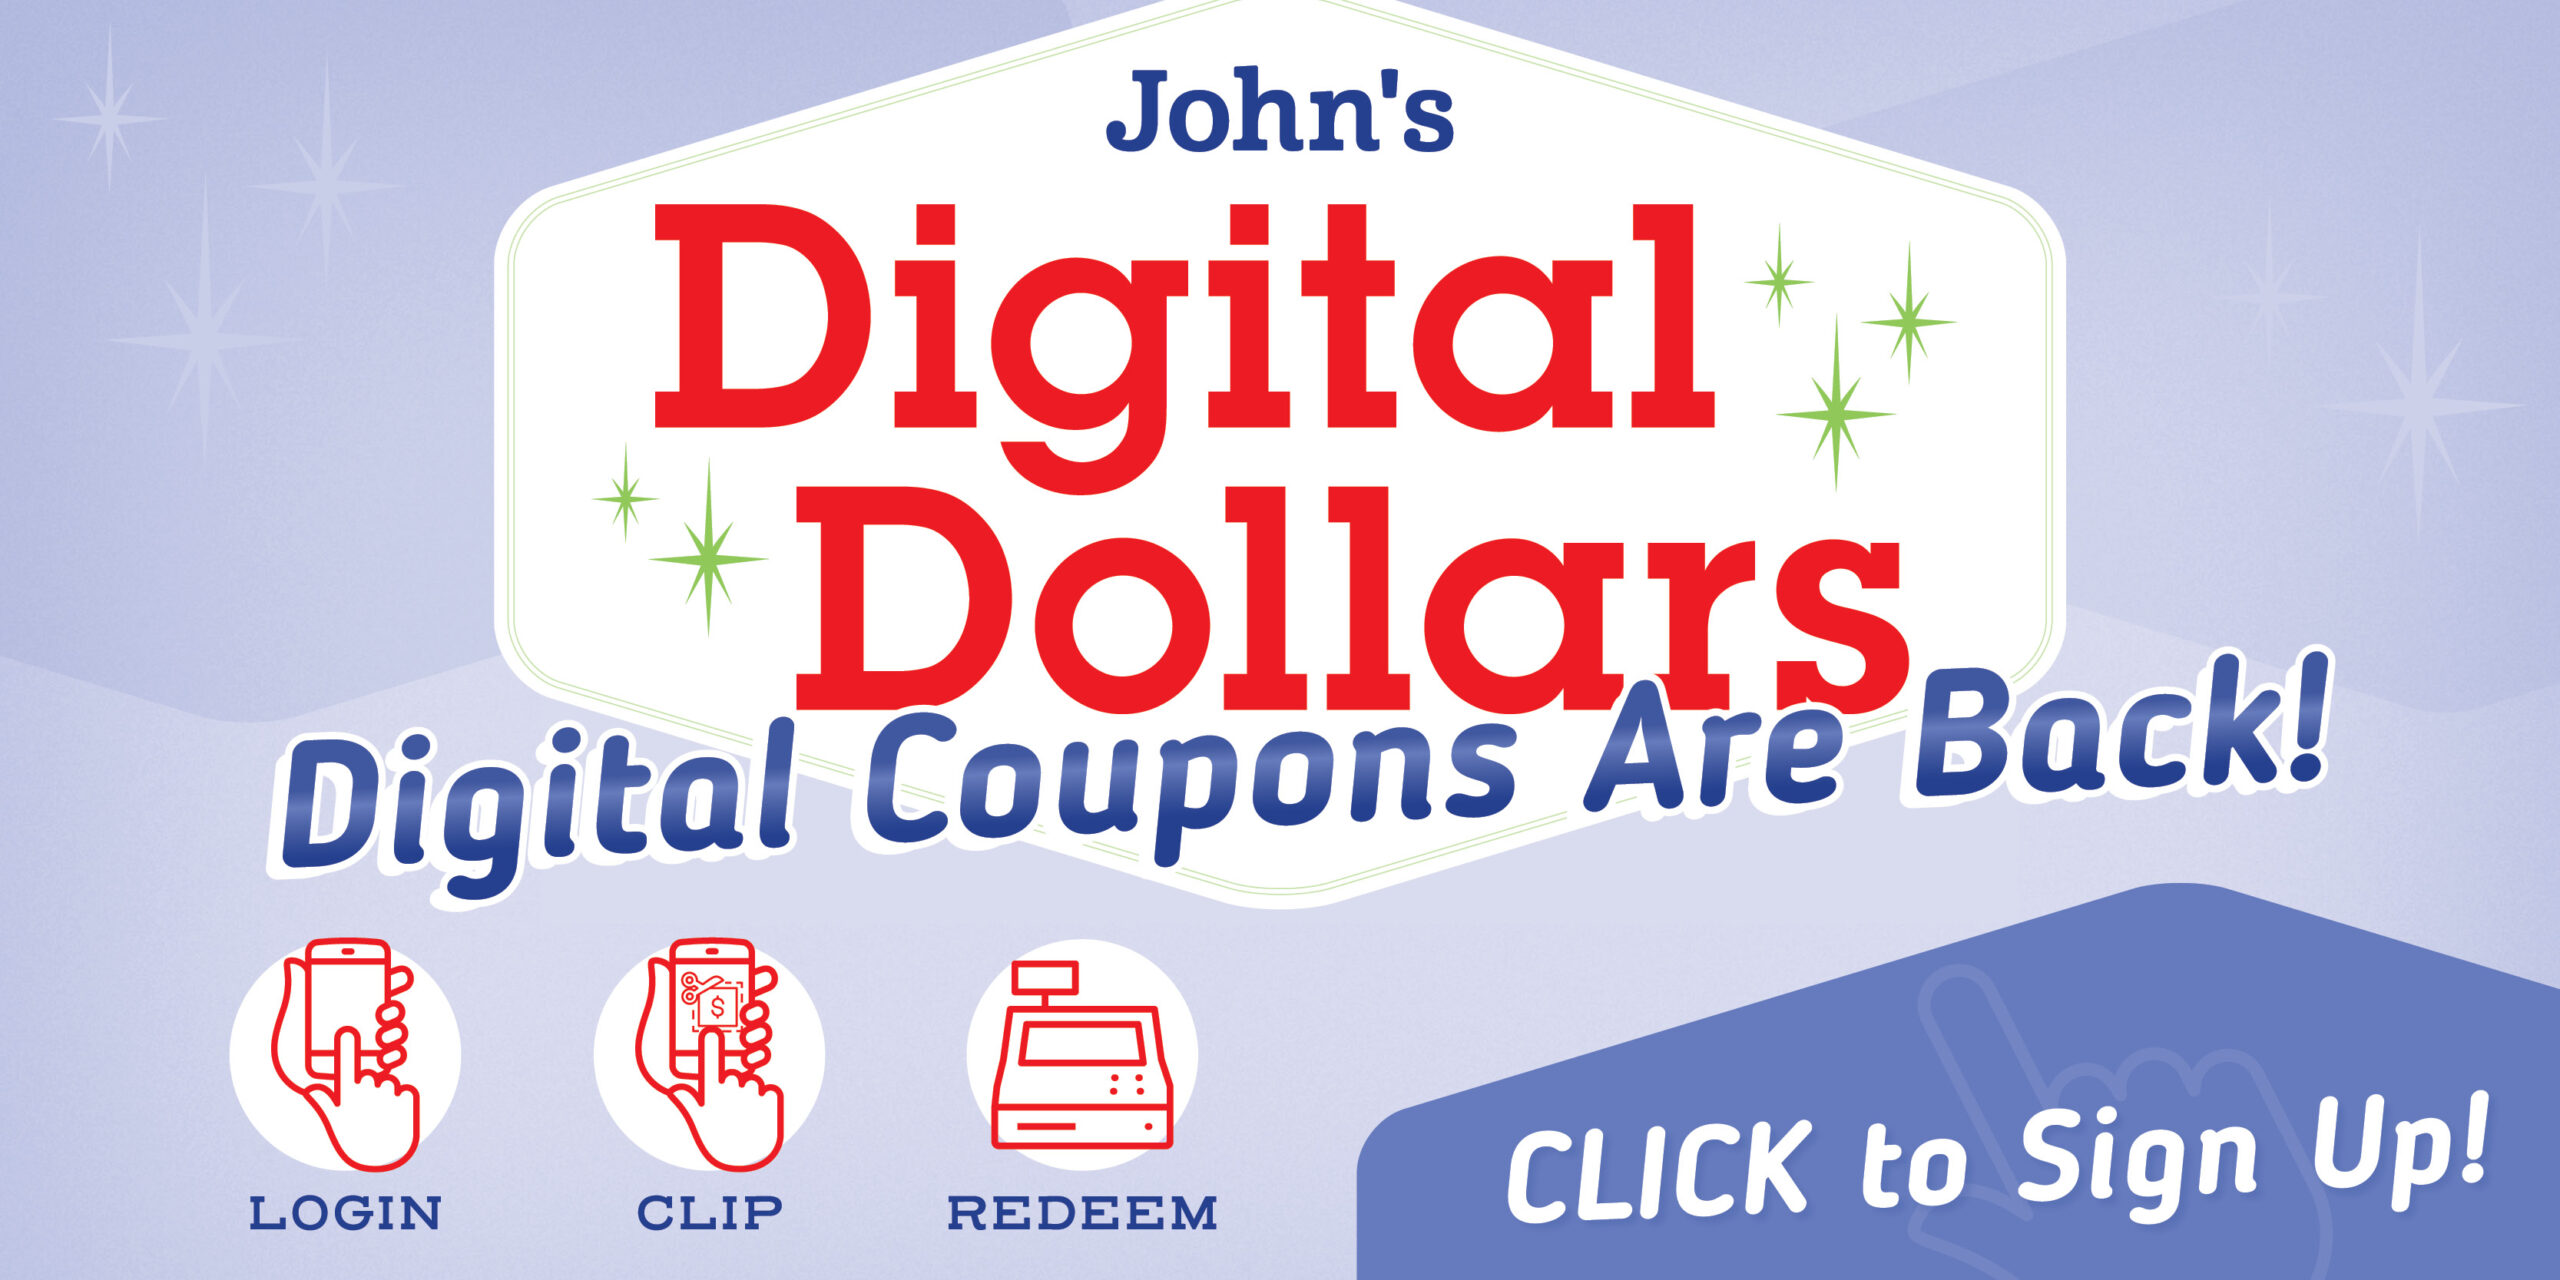 Digital Coupons are back! Click to Sign up!